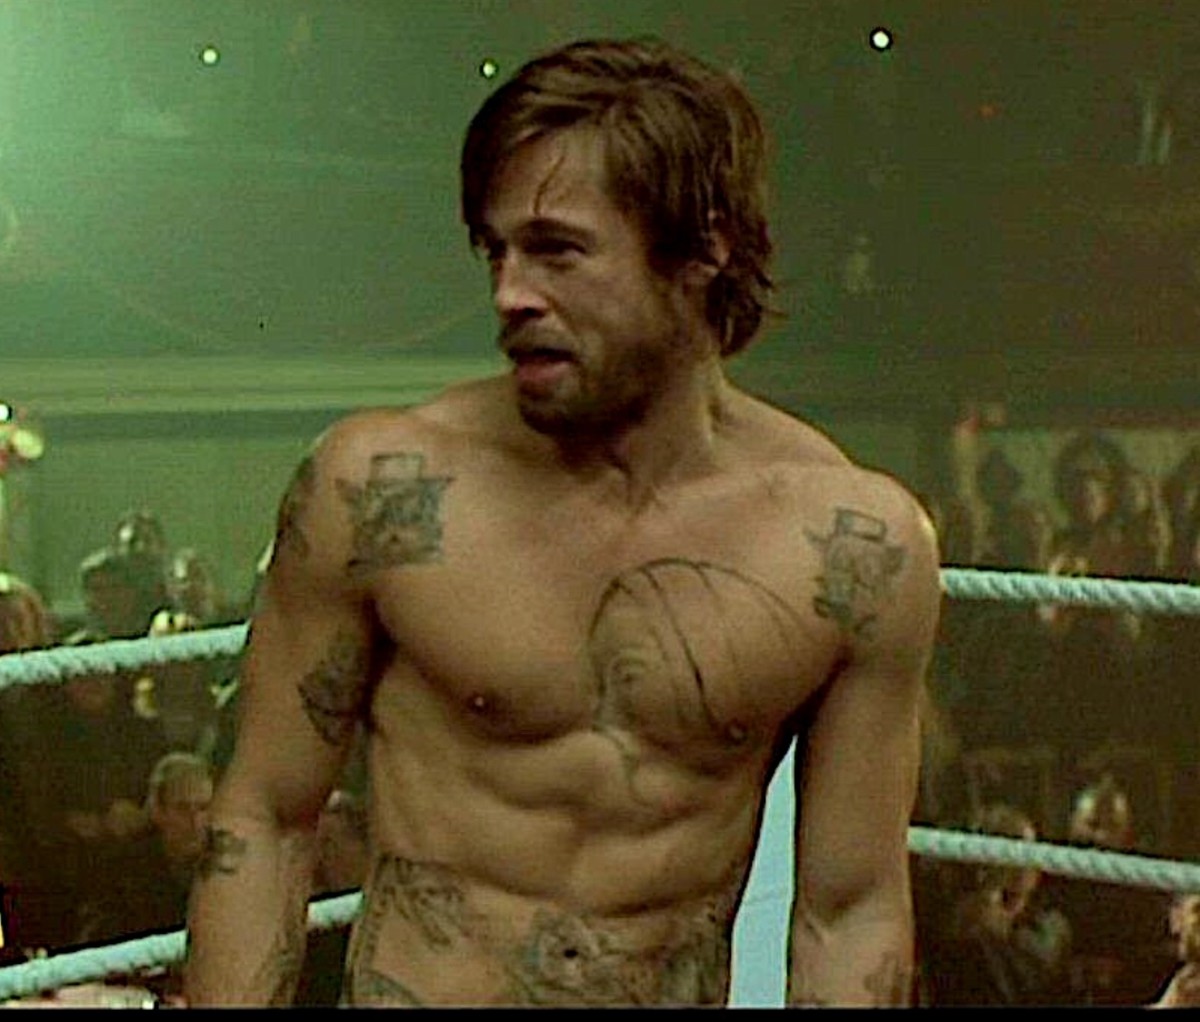 Brad Pitt as bare-knuckle boxer Mickey, sitting in a boxing ring, in 'Snatch'